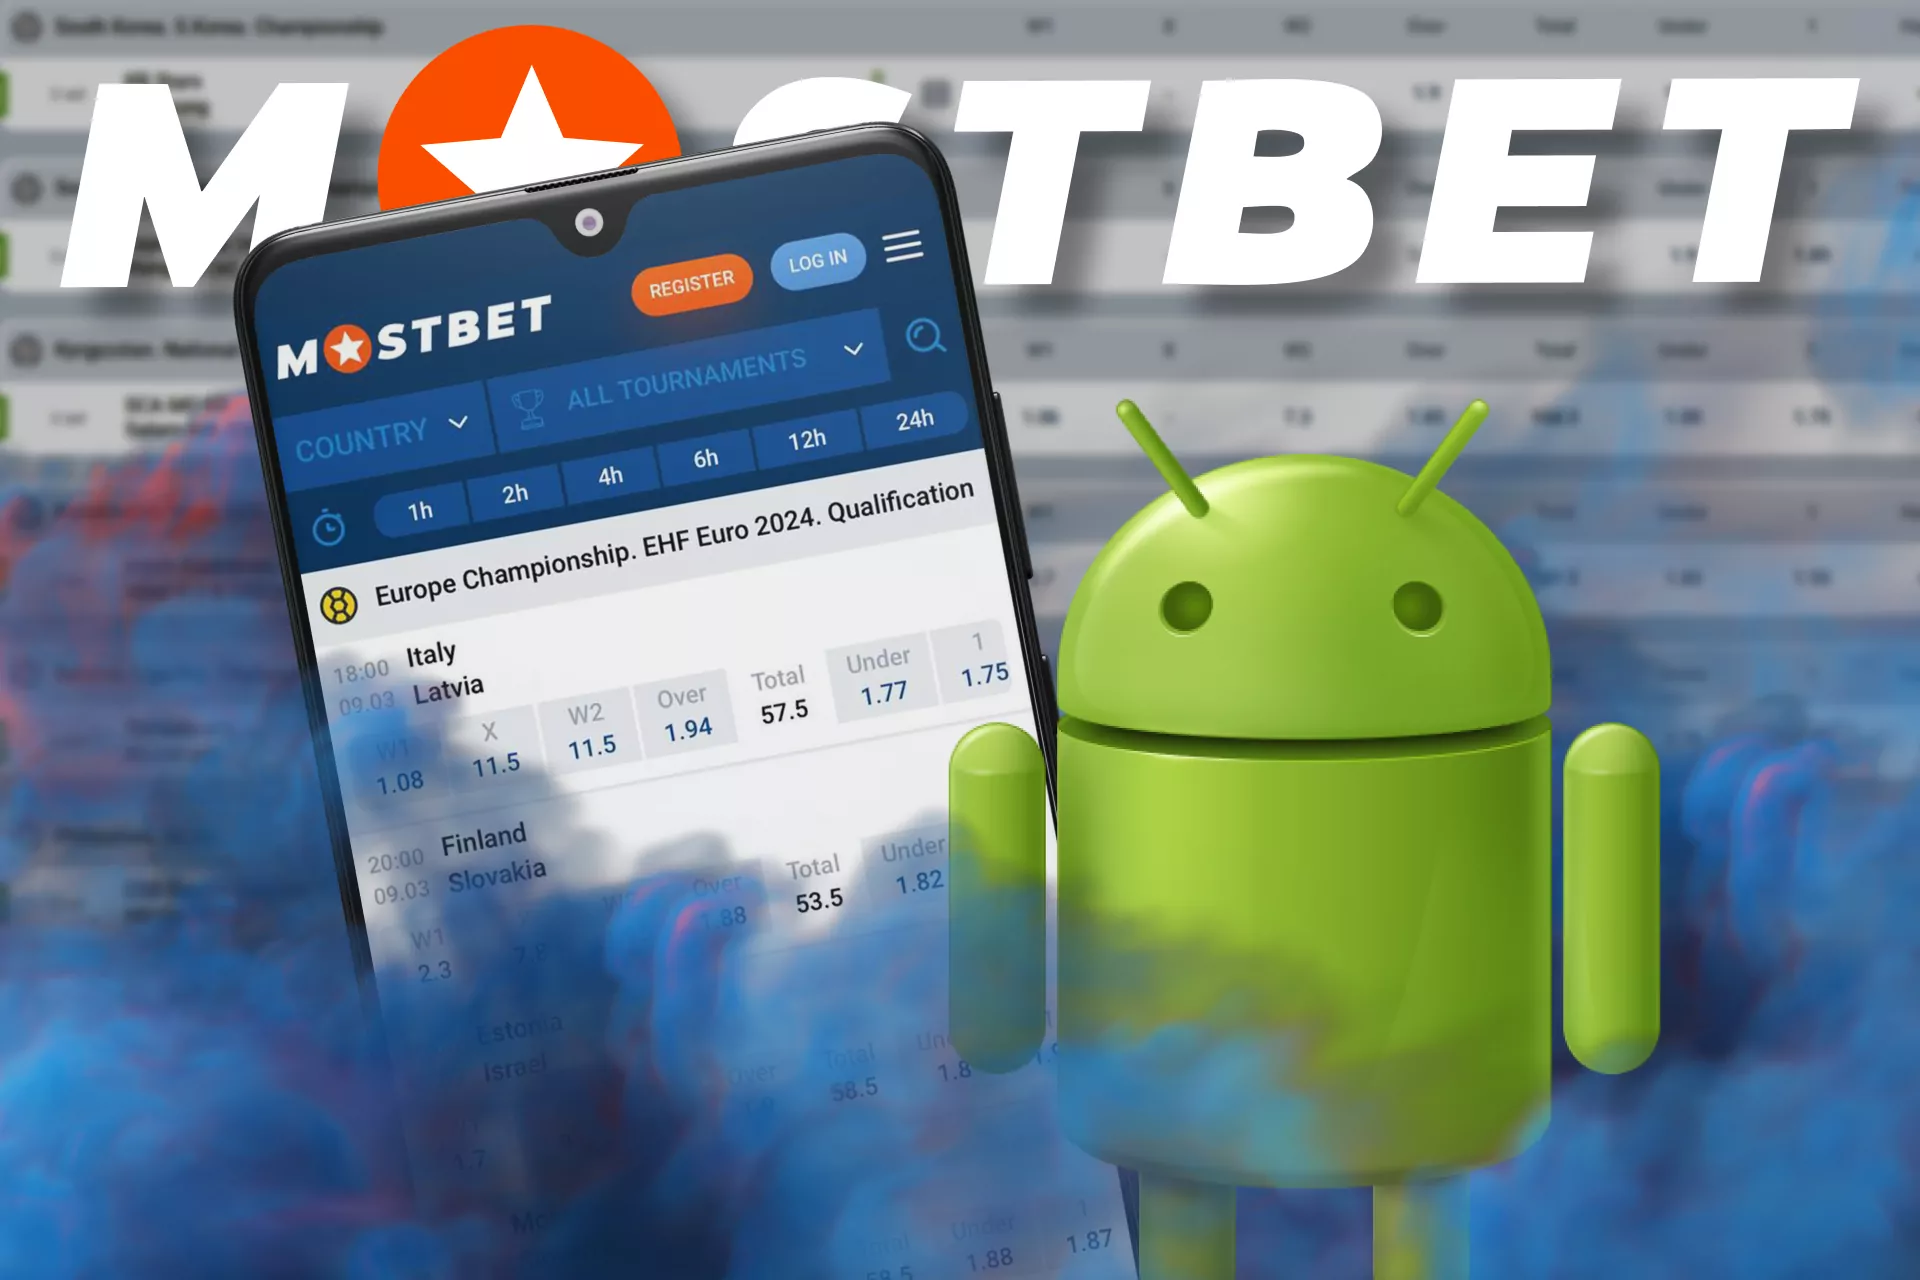 Place volleyball bets with Mostbet right on your Android device.